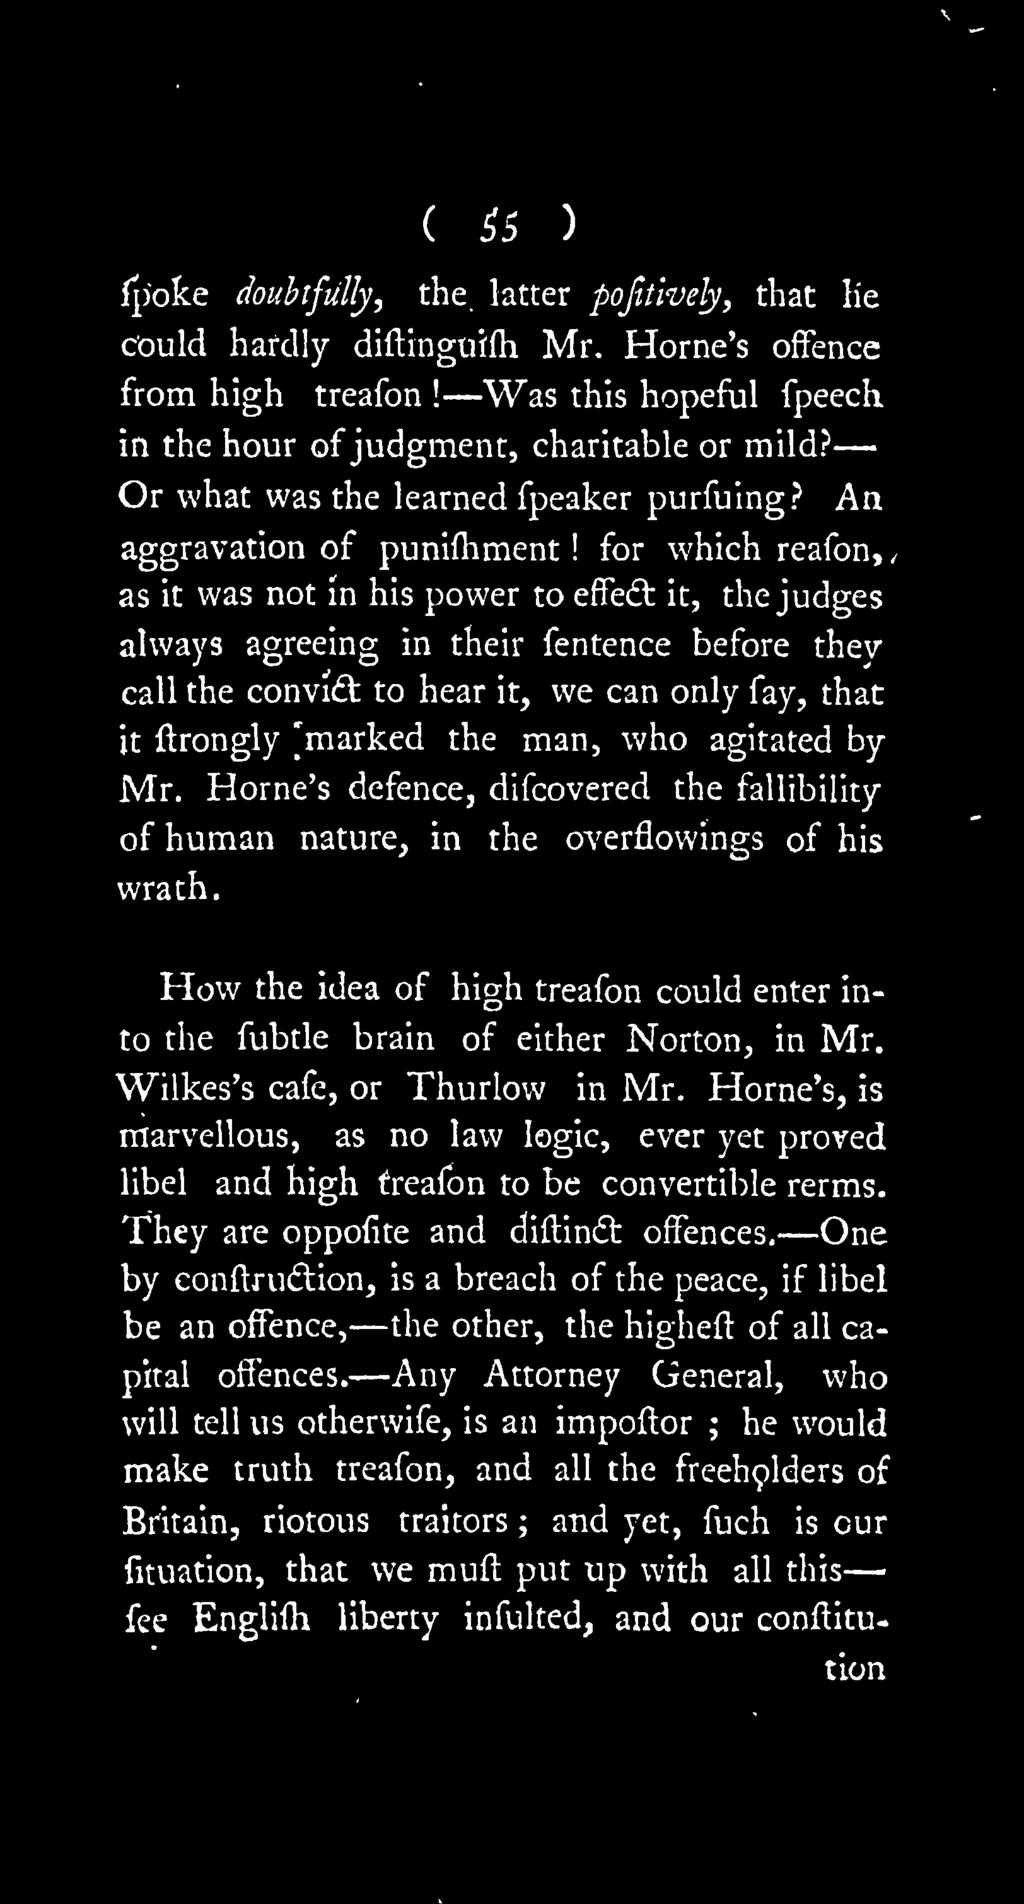 How the idea of high treafon could enter into the fubtle brain of either Norton, in Mr. Wilkes's cafe, or Thurlow in Mr.